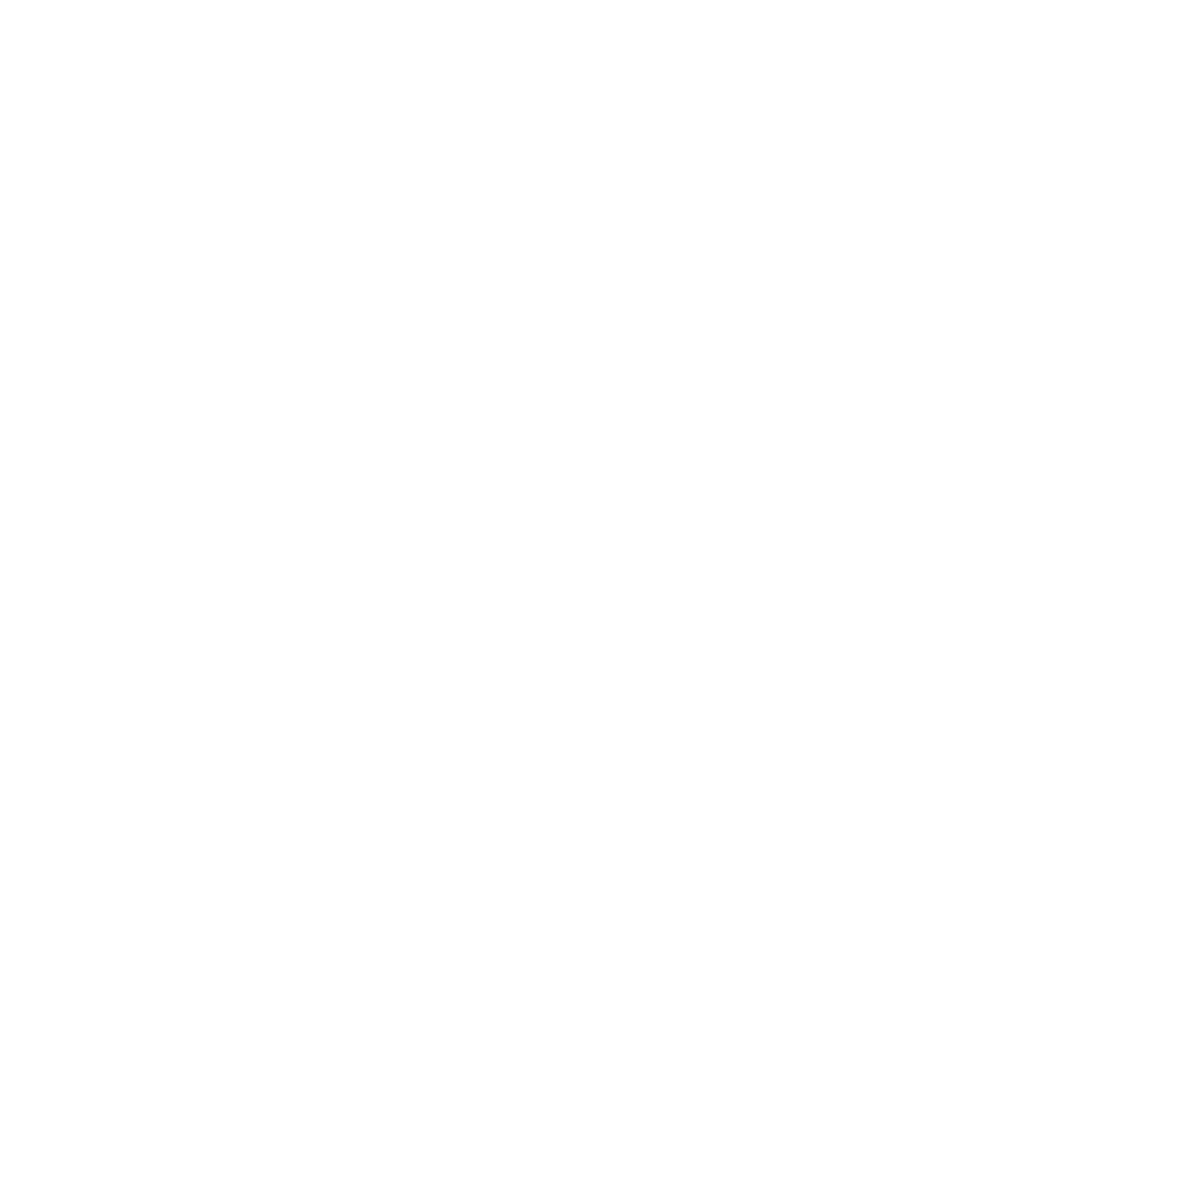 Massively parallel architecture